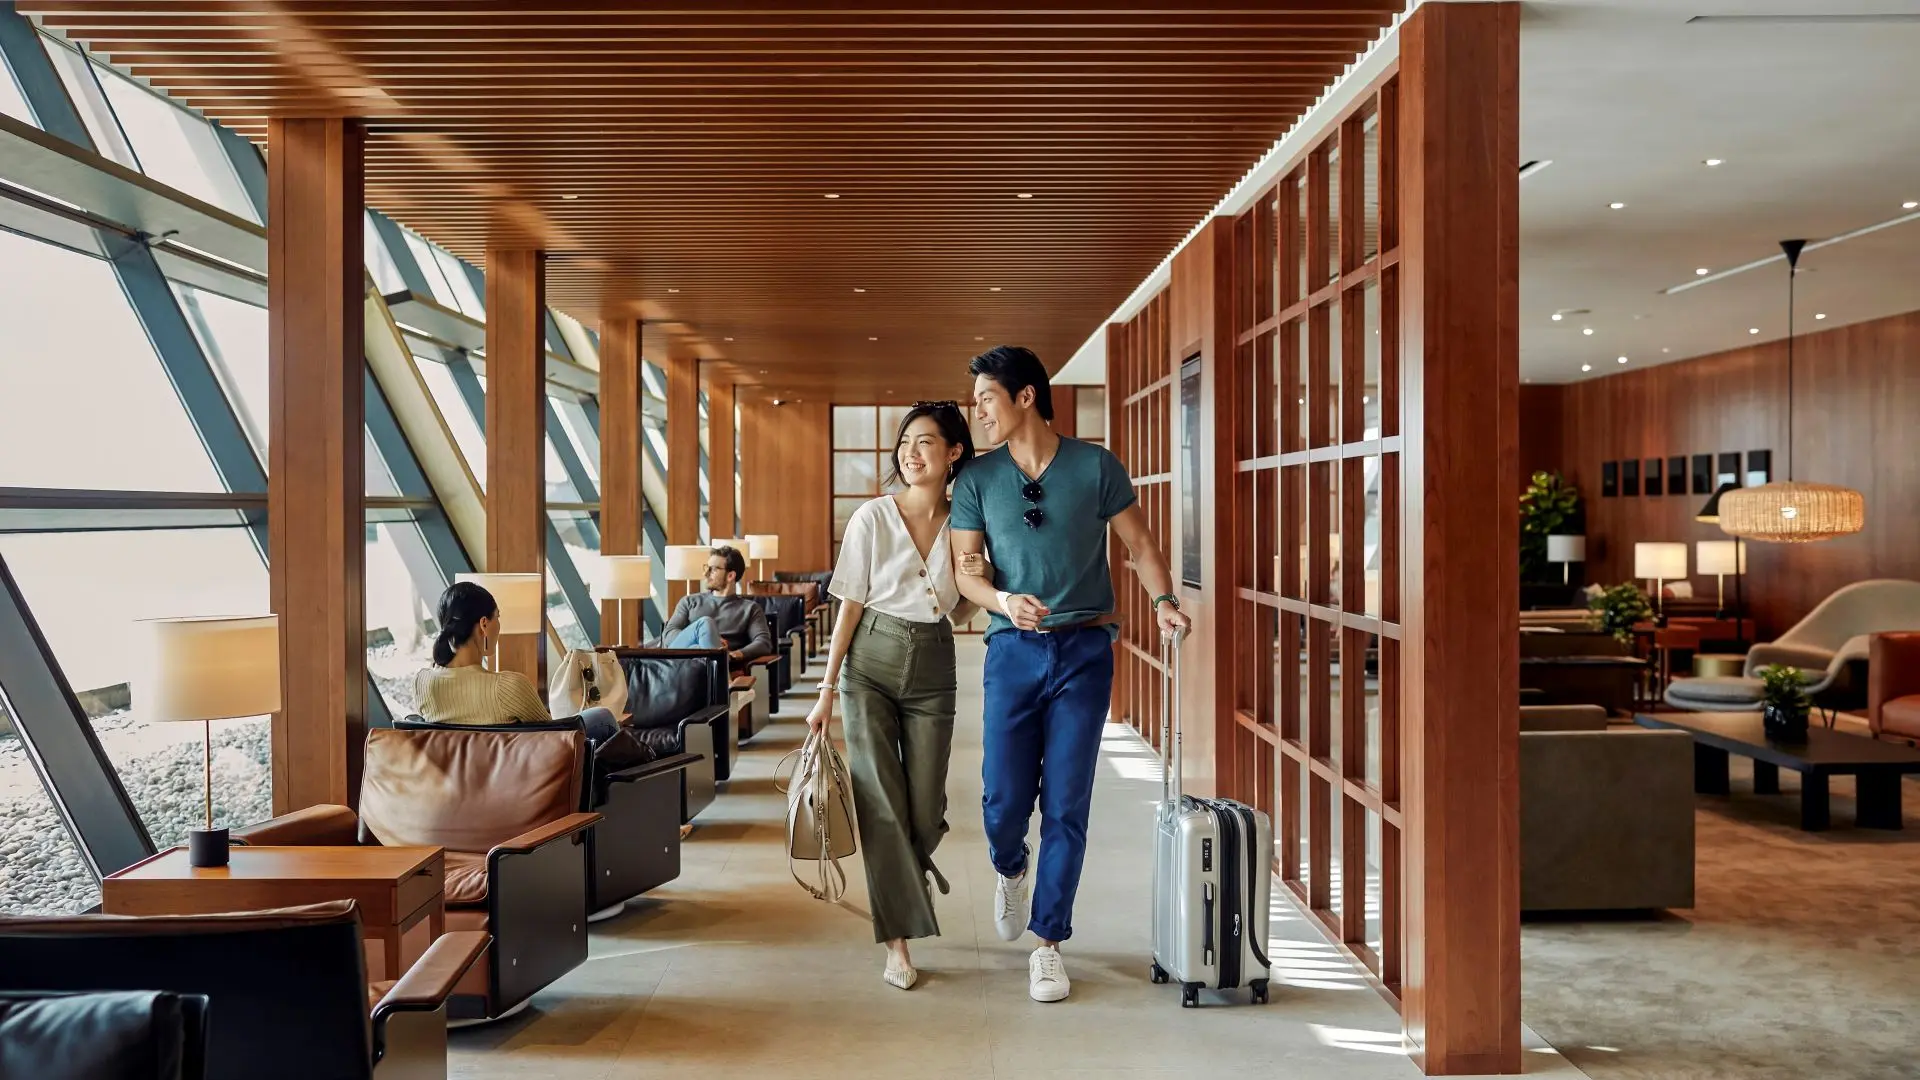 Airlines News - Cathay Pacific reopens flagship lounges in Hong Kong